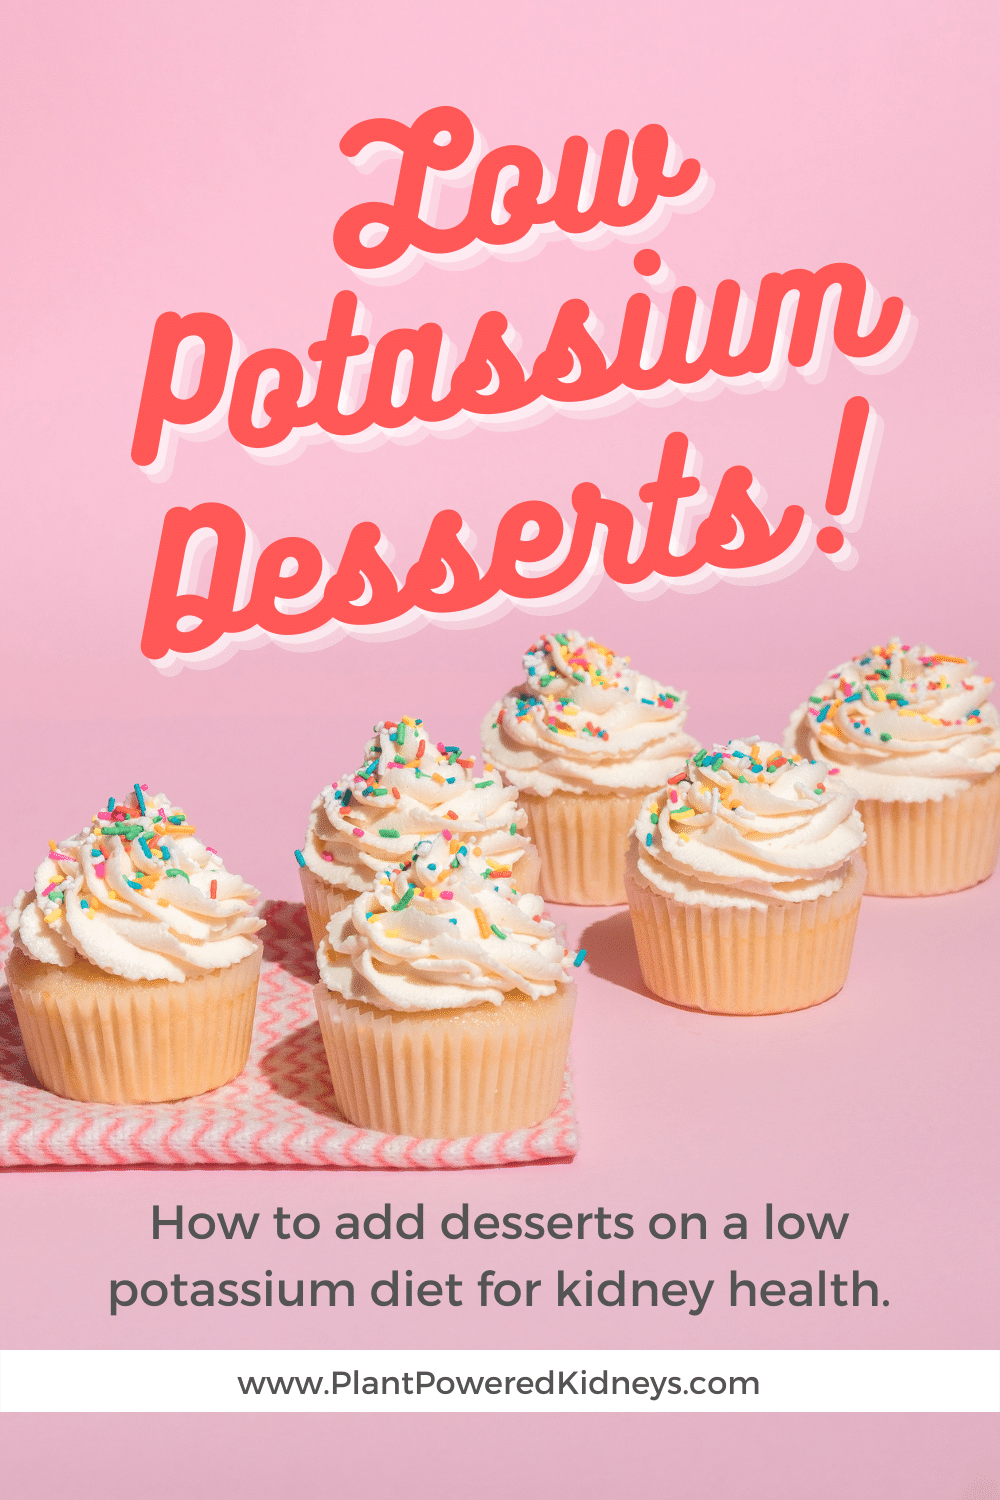 Low Potassium Desserts: How to add desserts on a low potassium diet for kidney health

(white cupcakes with white frosting and rainbow sprinkles, lined up on a pink cloth)